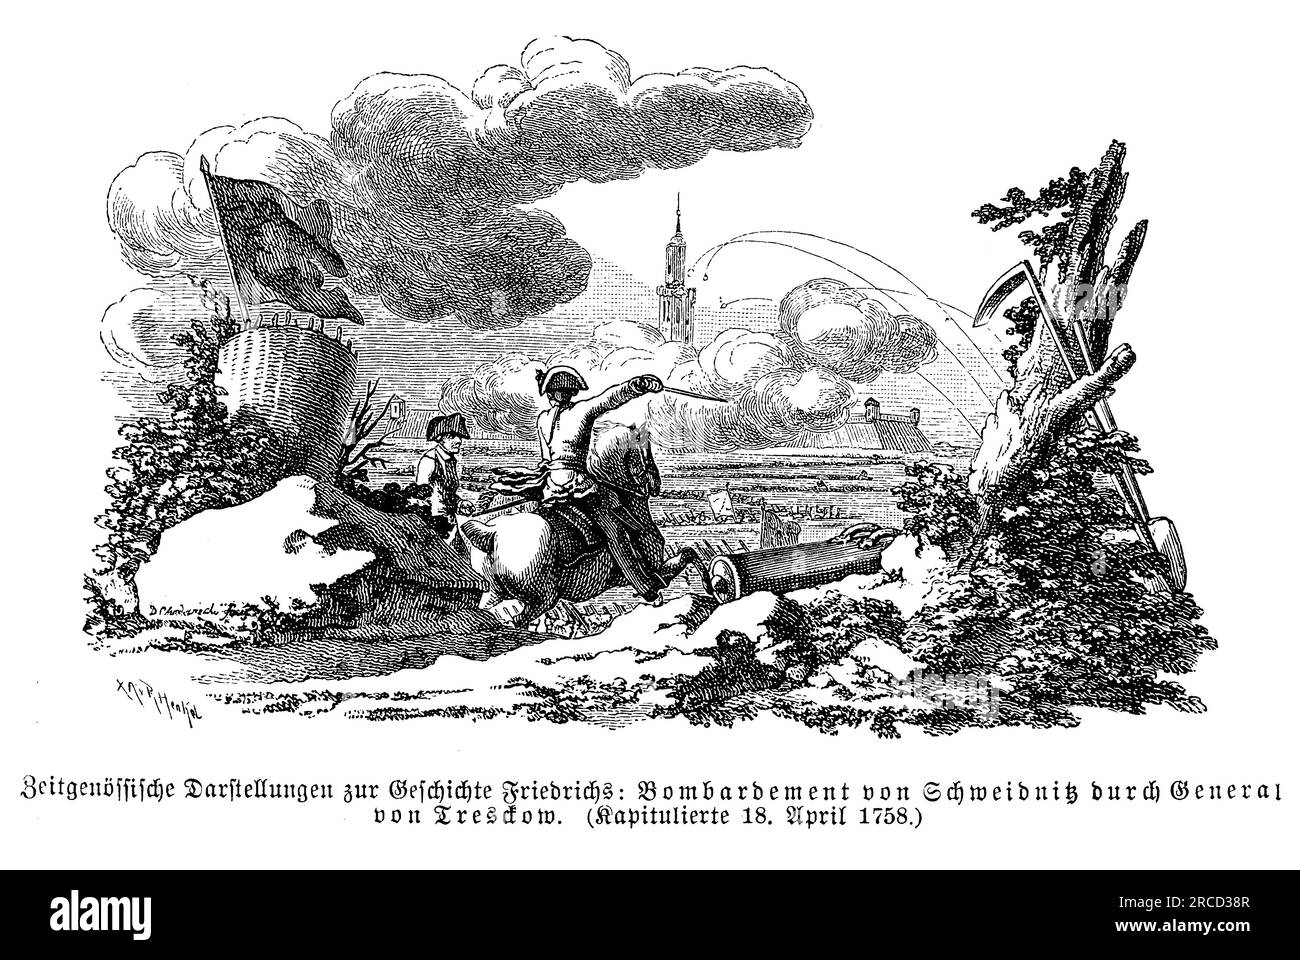 Bombardment and siege of  the city of Schweidnitz from the Prussian troops of Frederick the Great under the leadership of General von Tresckow Stock Photo